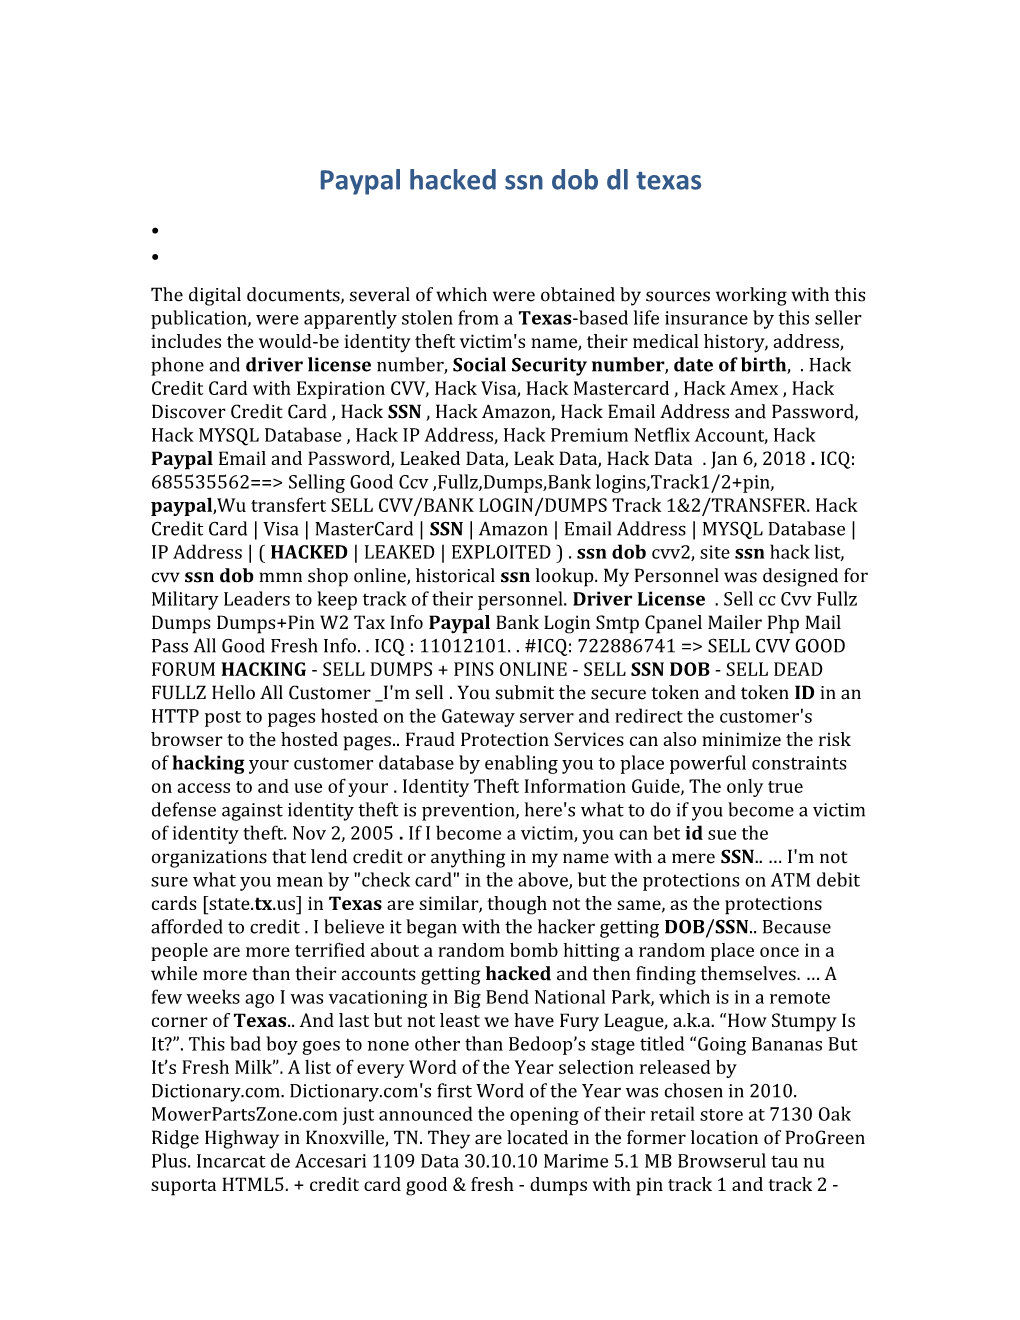 Paypal Hacked Ssn Dob Dl Texas